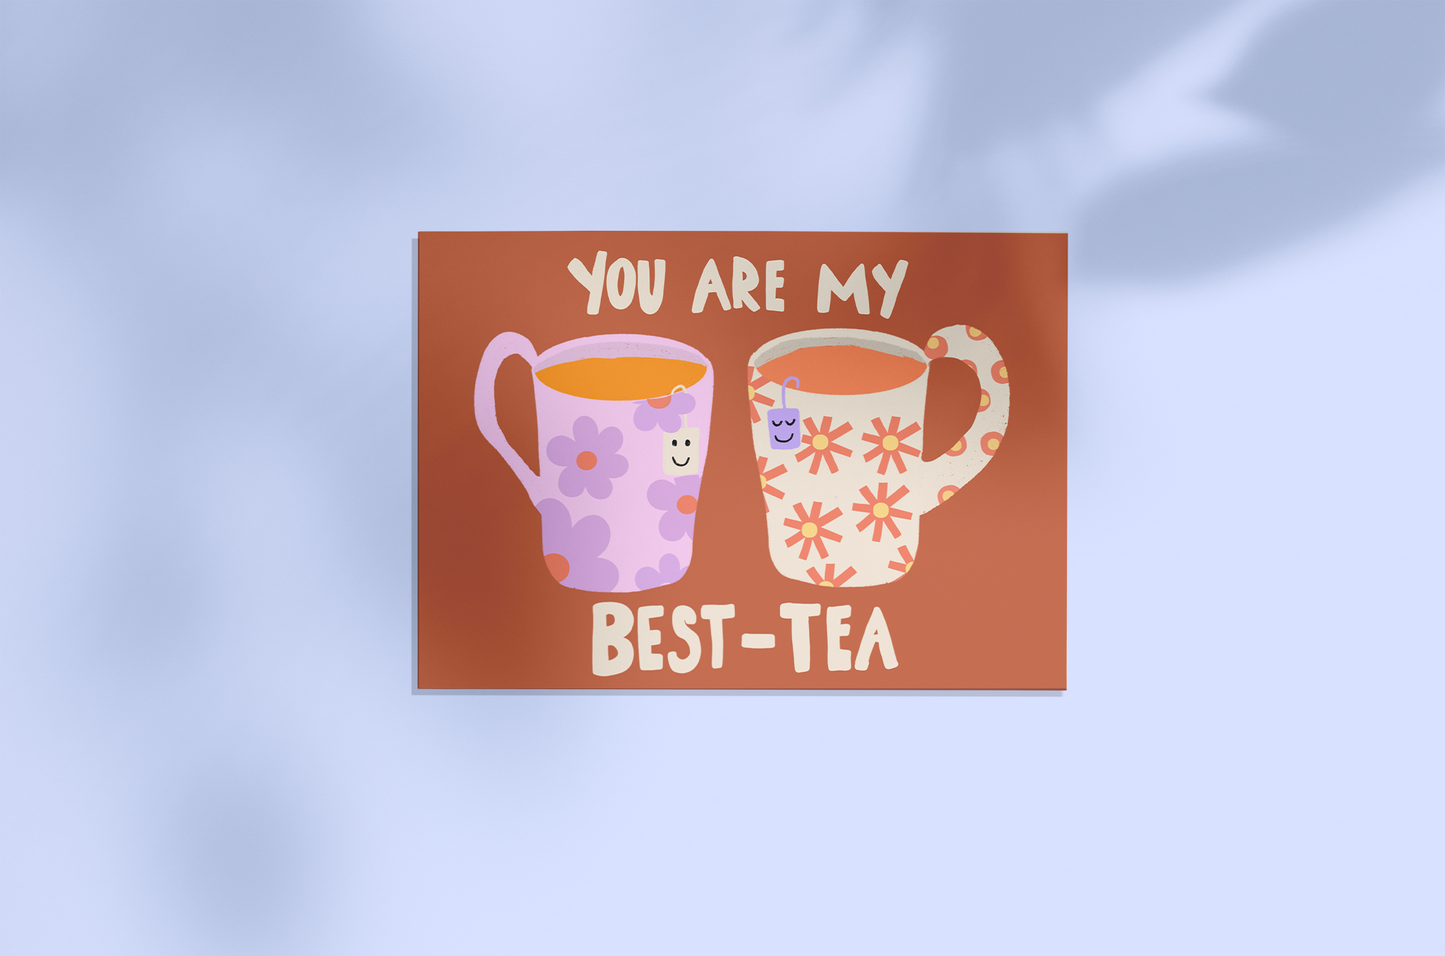 You are my BEST-TEA